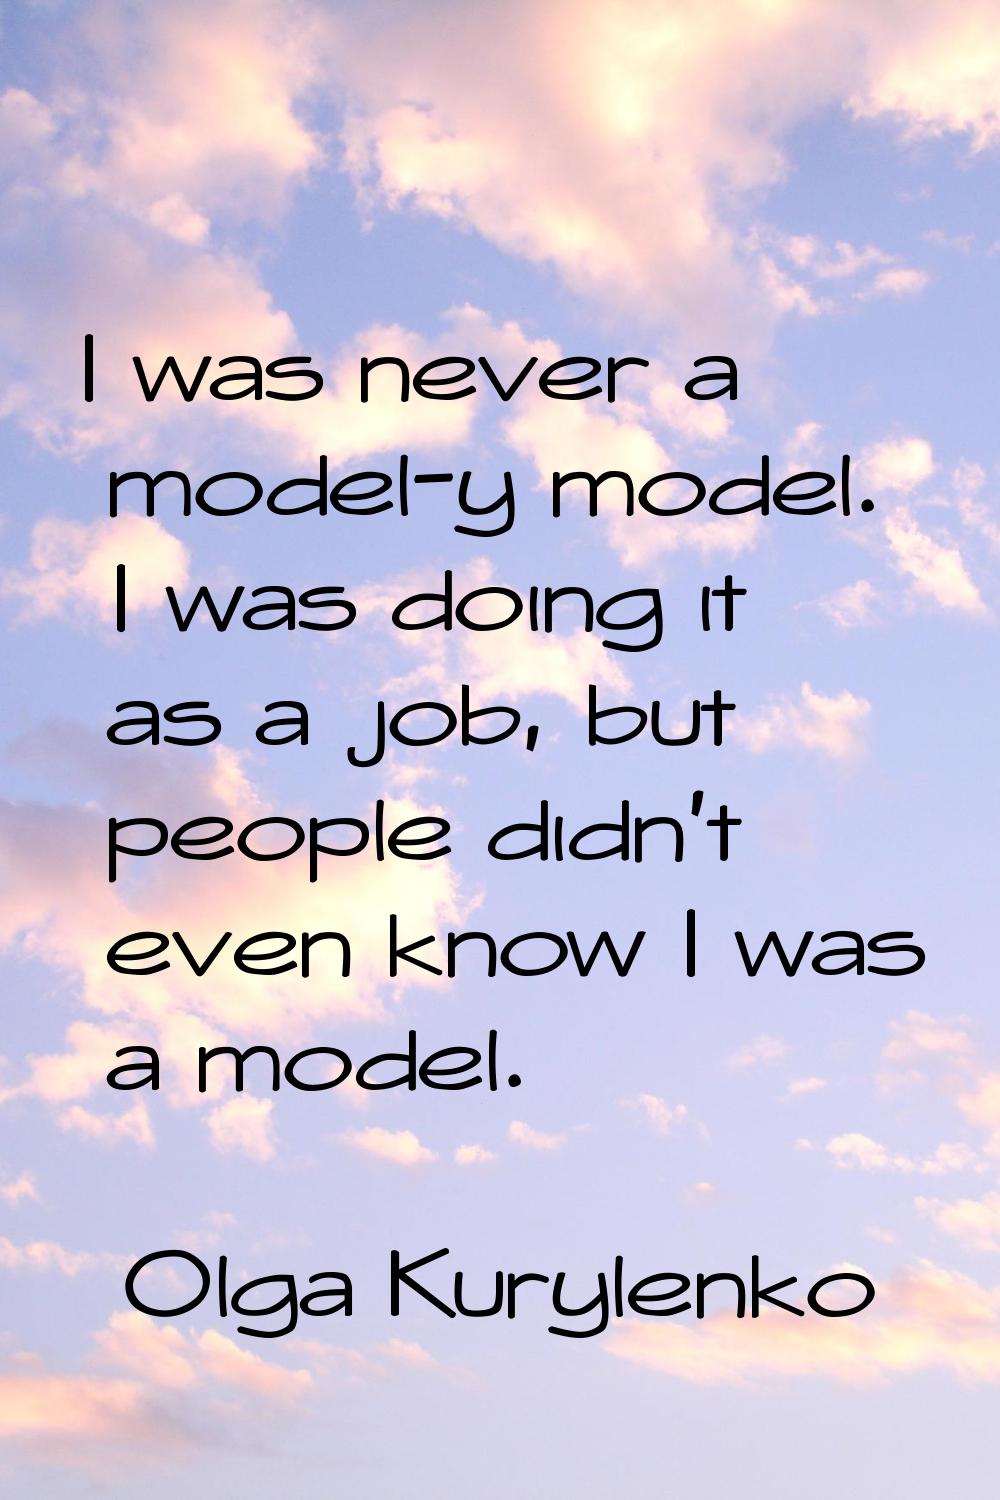 I was never a model-y model. I was doing it as a job, but people didn't even know I was a model.